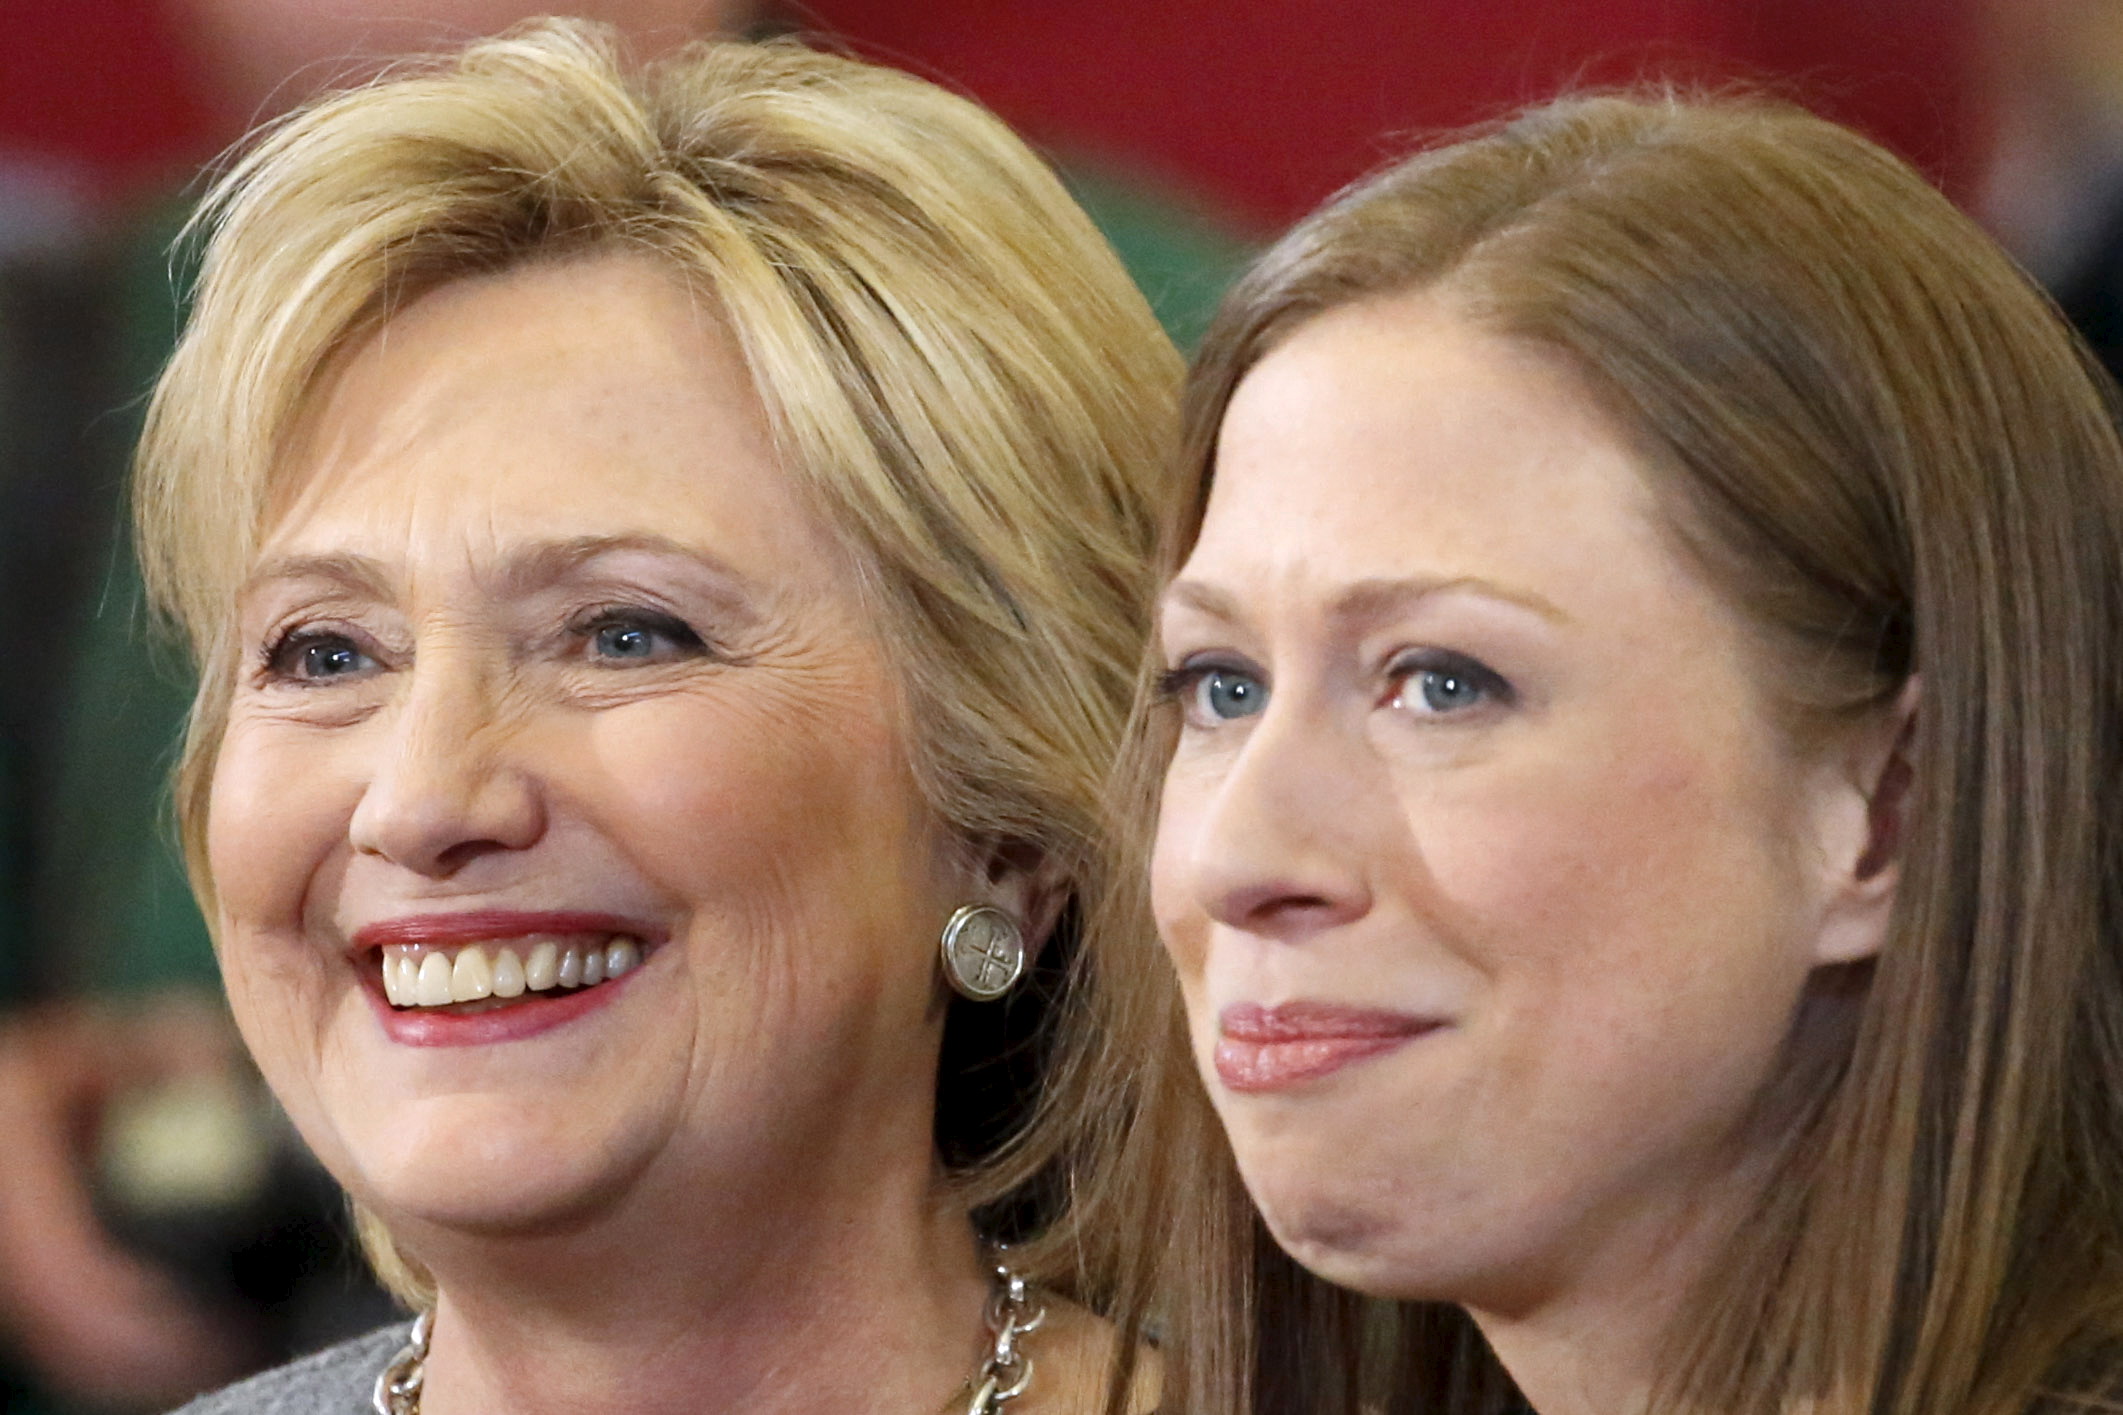 U.S. Democratic presidential nominee Hillary Clinton and her daughter Chelsea Clinton at a campaign rally at Abraham Lincoln High School in Council Bluffs, Iowa, U.S. on Jan. 31, 2016. (Adrees Latif—Reuters)